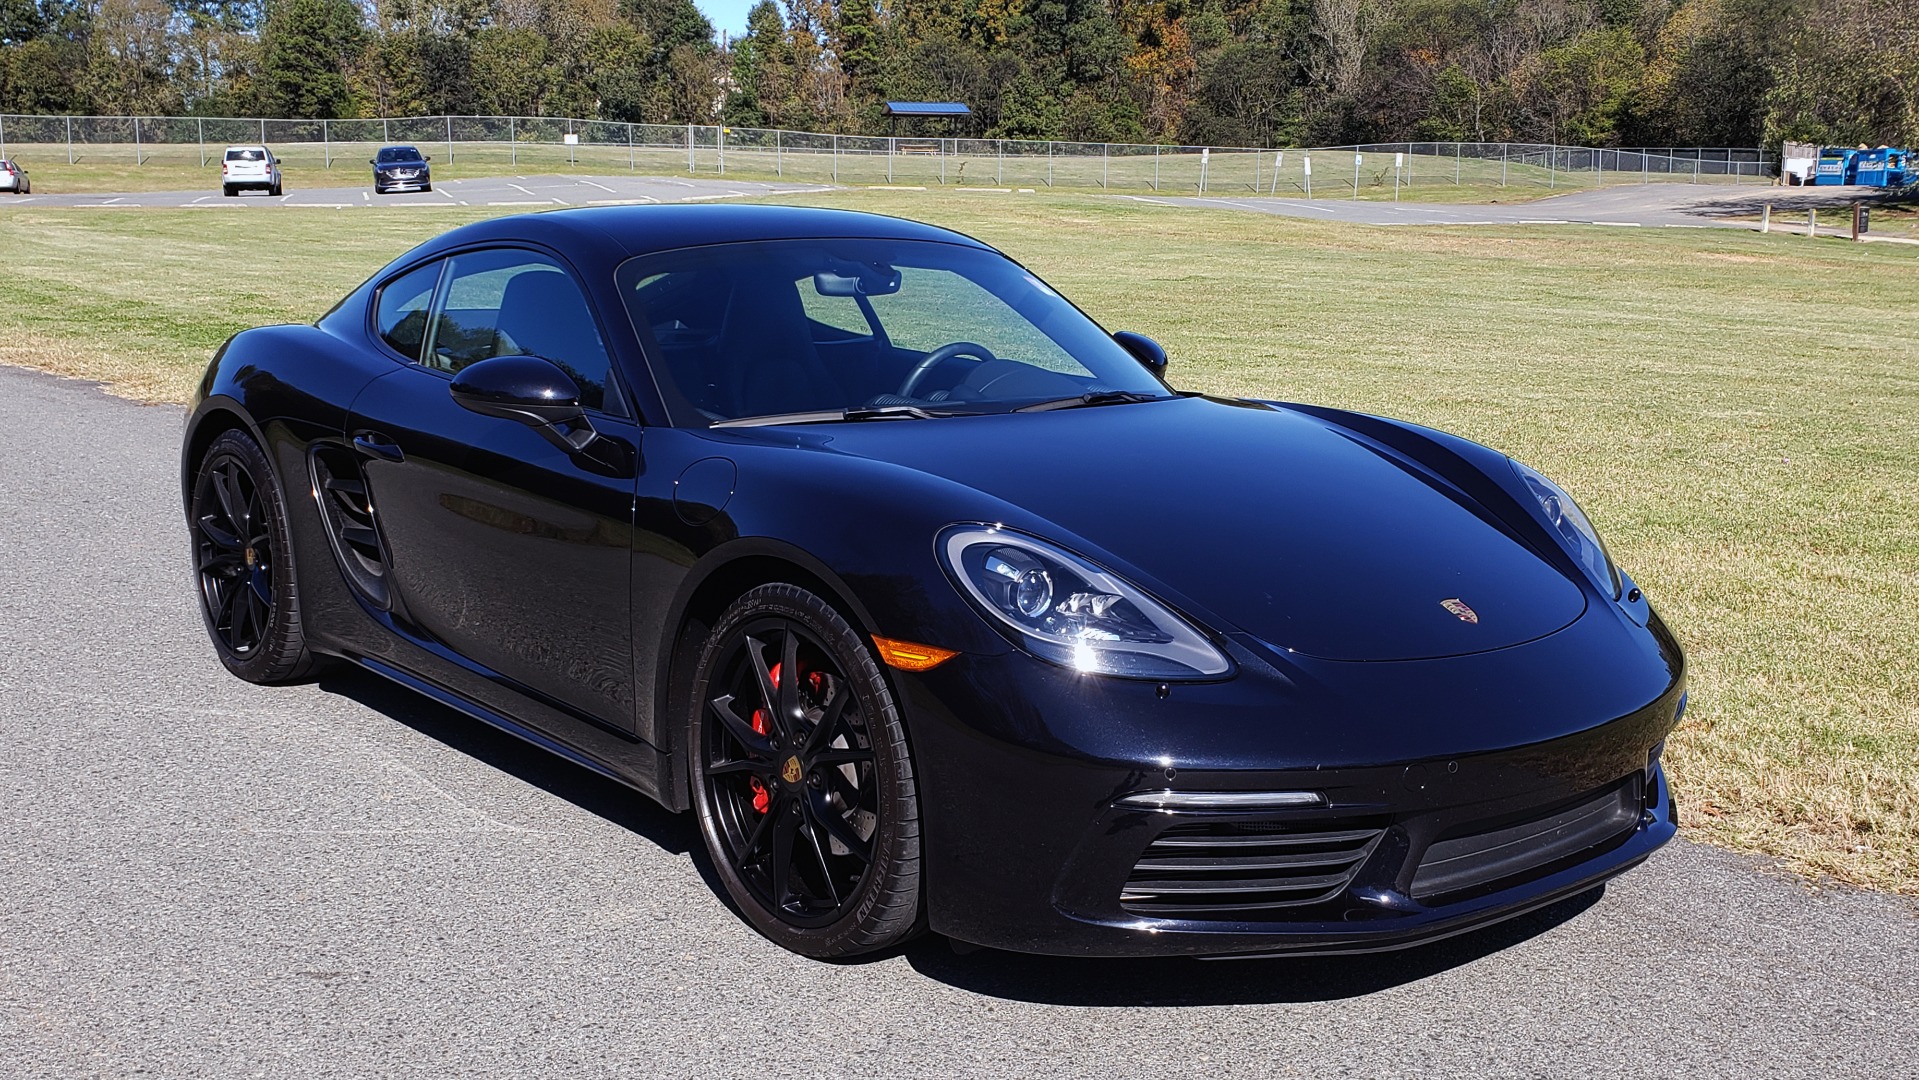 Used 2019 Porsche 718 CAYMAN S COUPE / PDK TRANS / LCA / BOSE / HTD STS / LIGHT DESIGN PKG for sale Sold at Formula Imports in Charlotte NC 28227 6